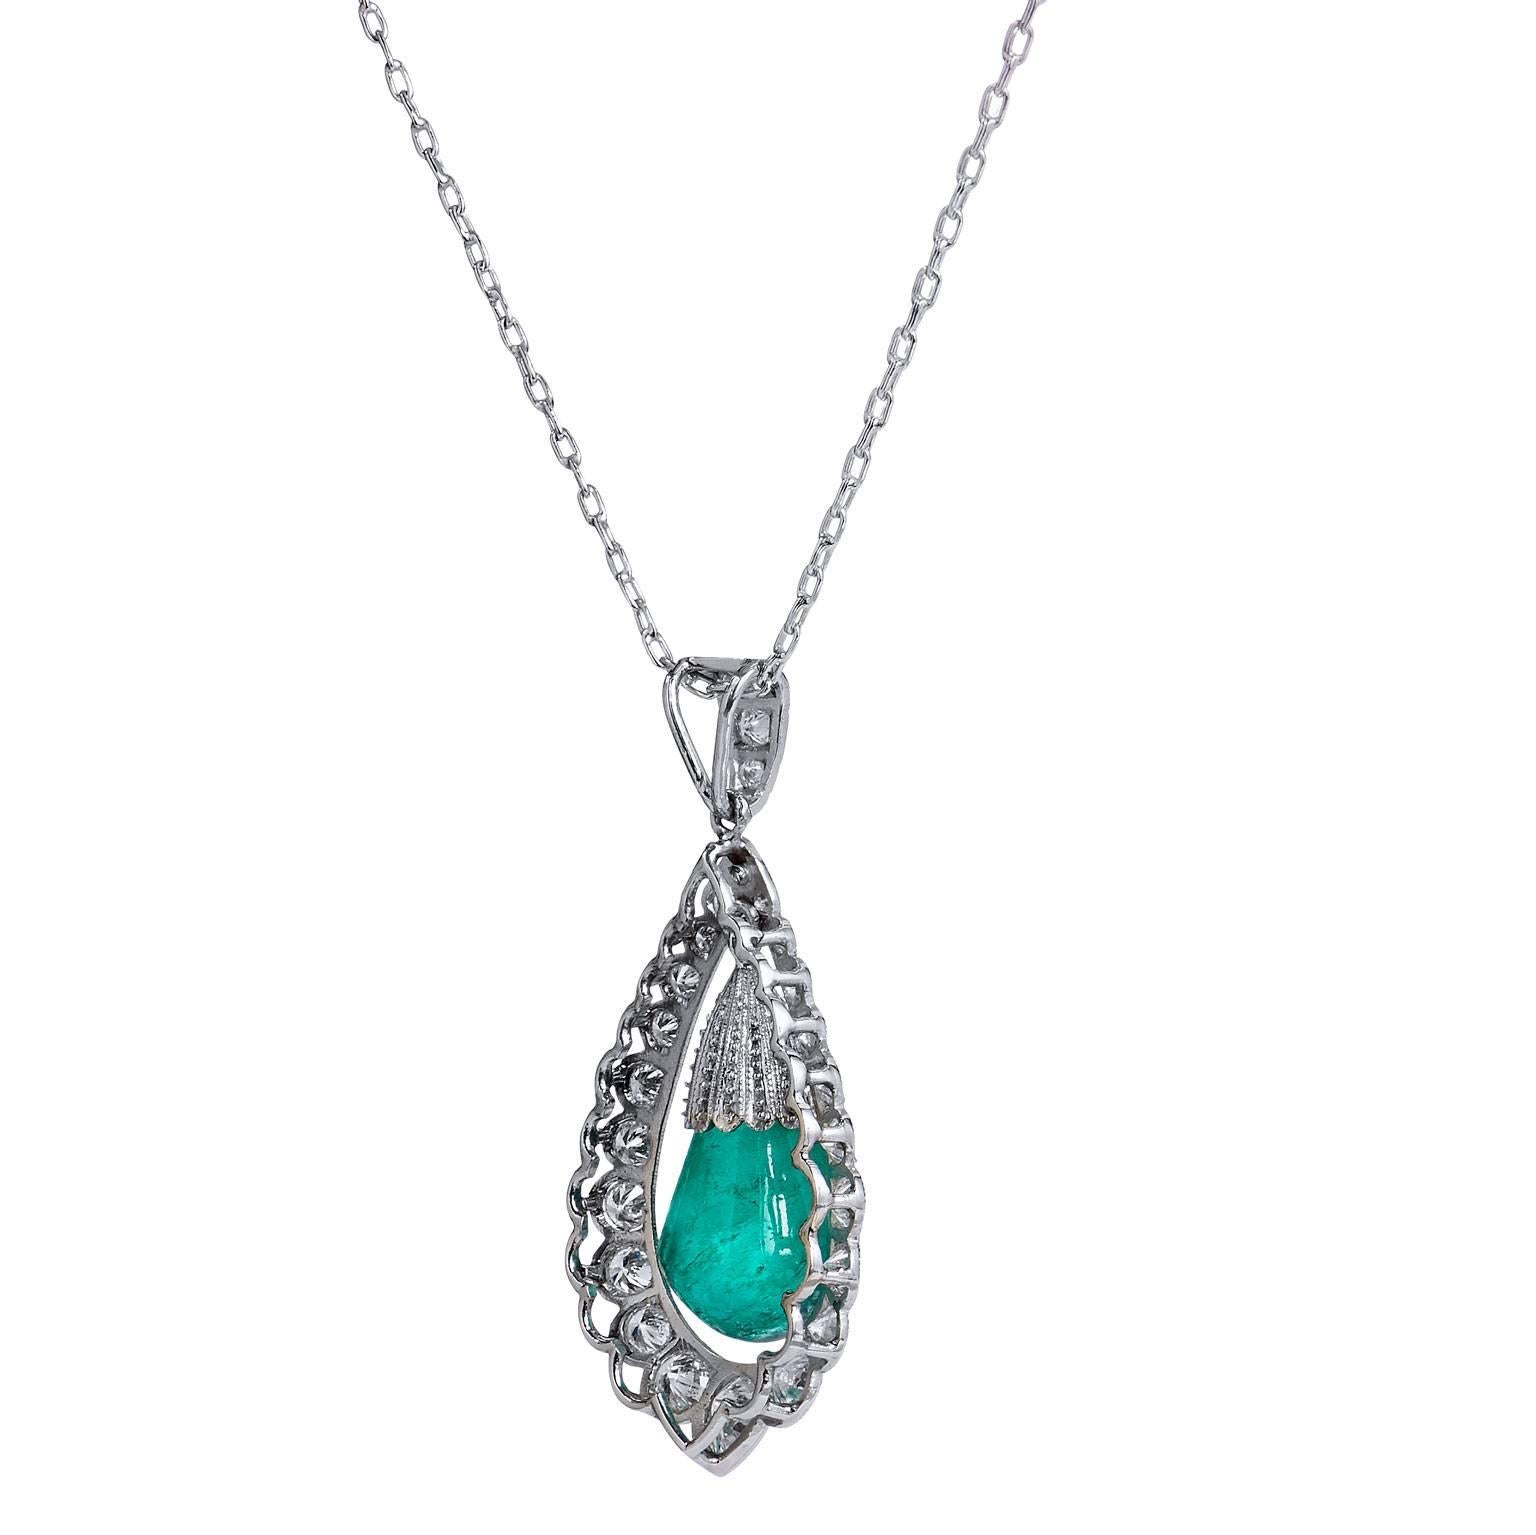 This pendant is crafted in platinum. It features 7.17ct cabochon drop emerald. The unique emerald is suspended and surrounding by 1.61 total carats of diamonds ranging in cuts from round brilliant, pear shape, rose and single cut. This Art Deco